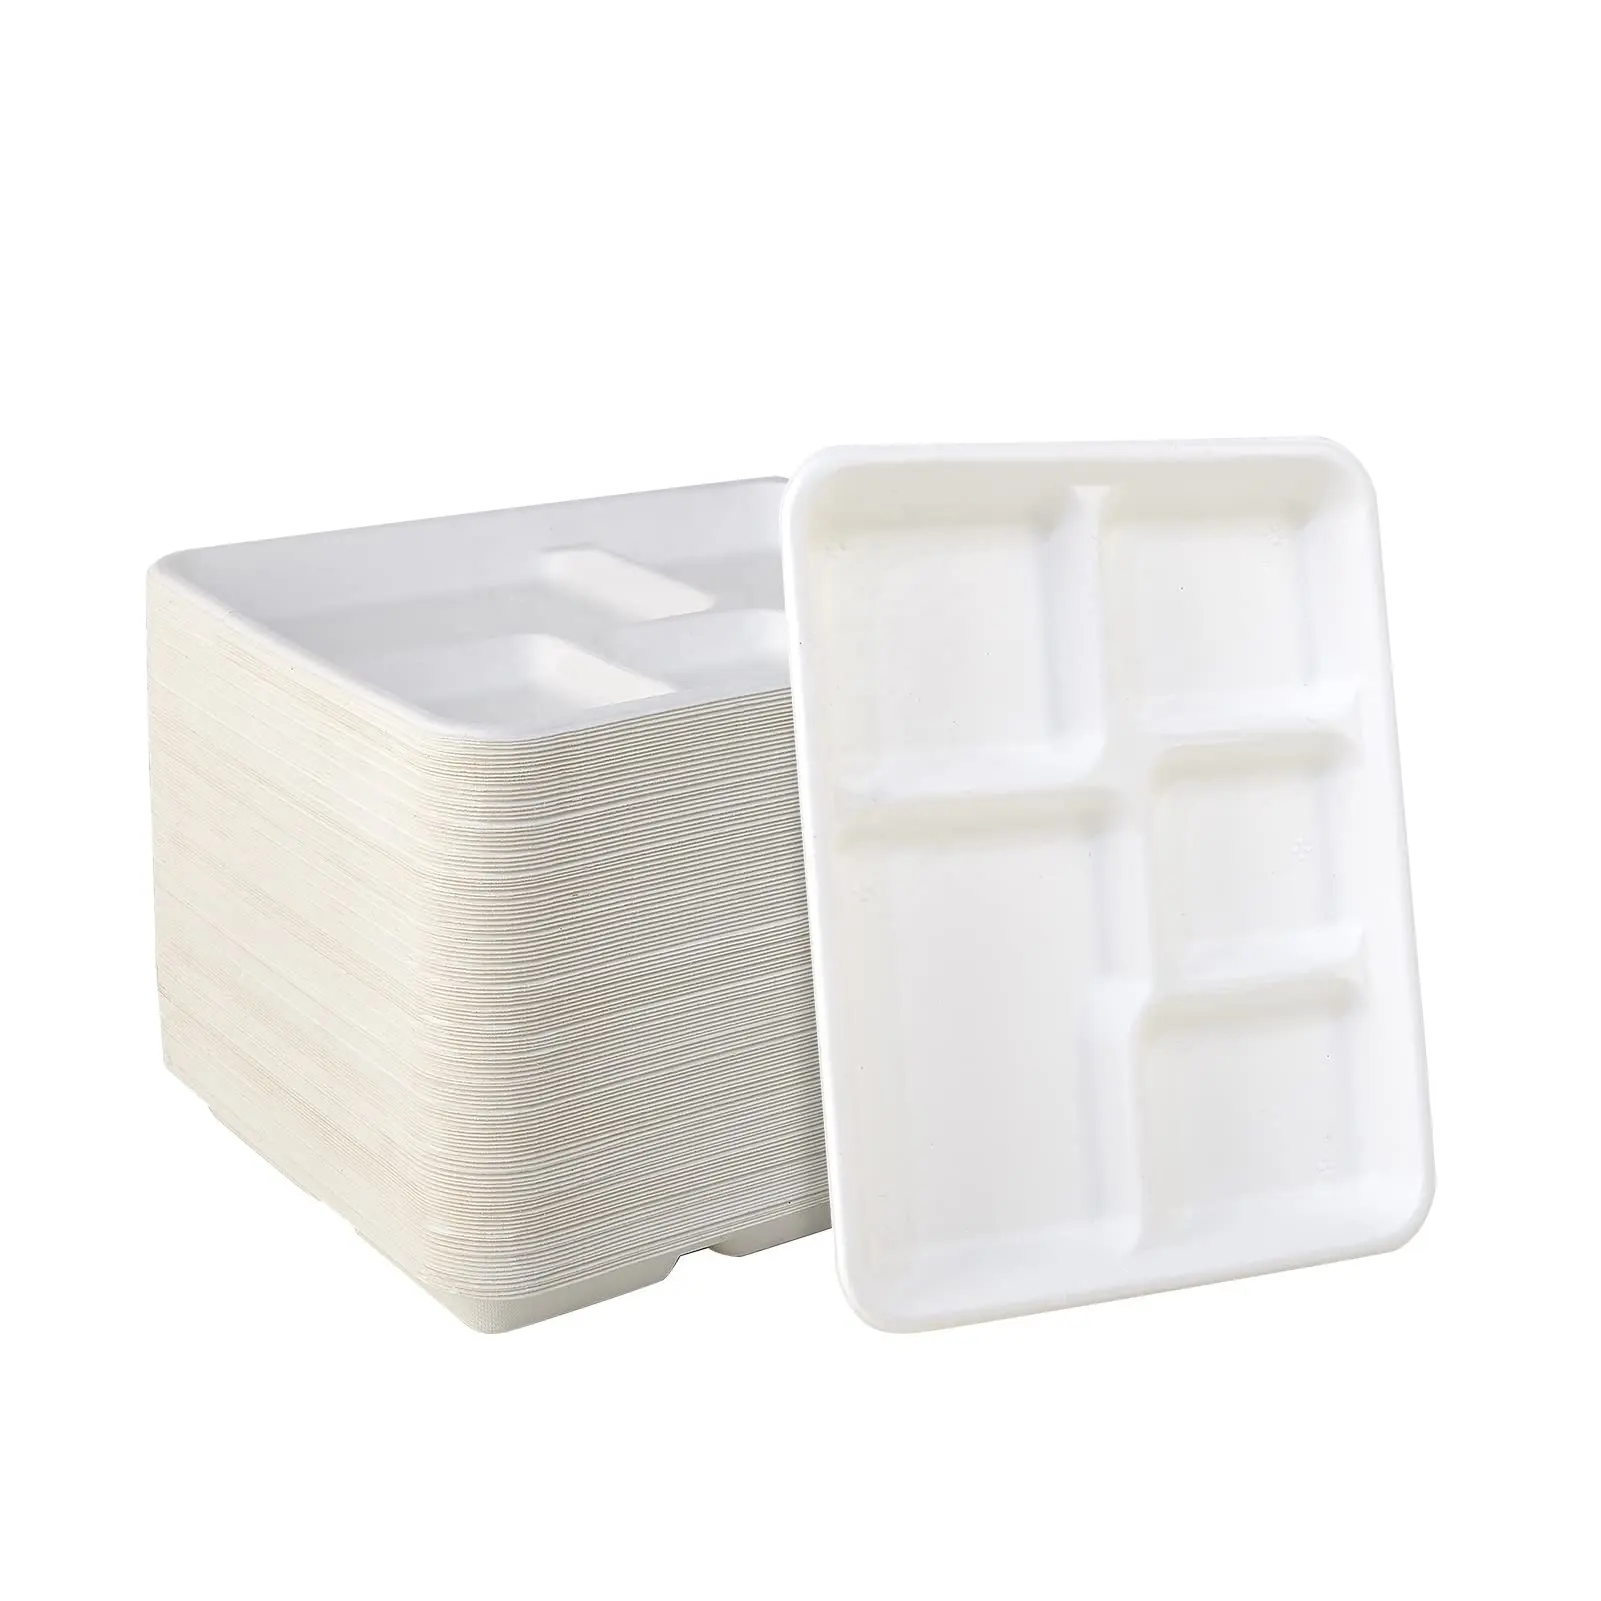 Disposable biodegradable 5 6 compartment plates Compartment paper plates school hospital lunch tray